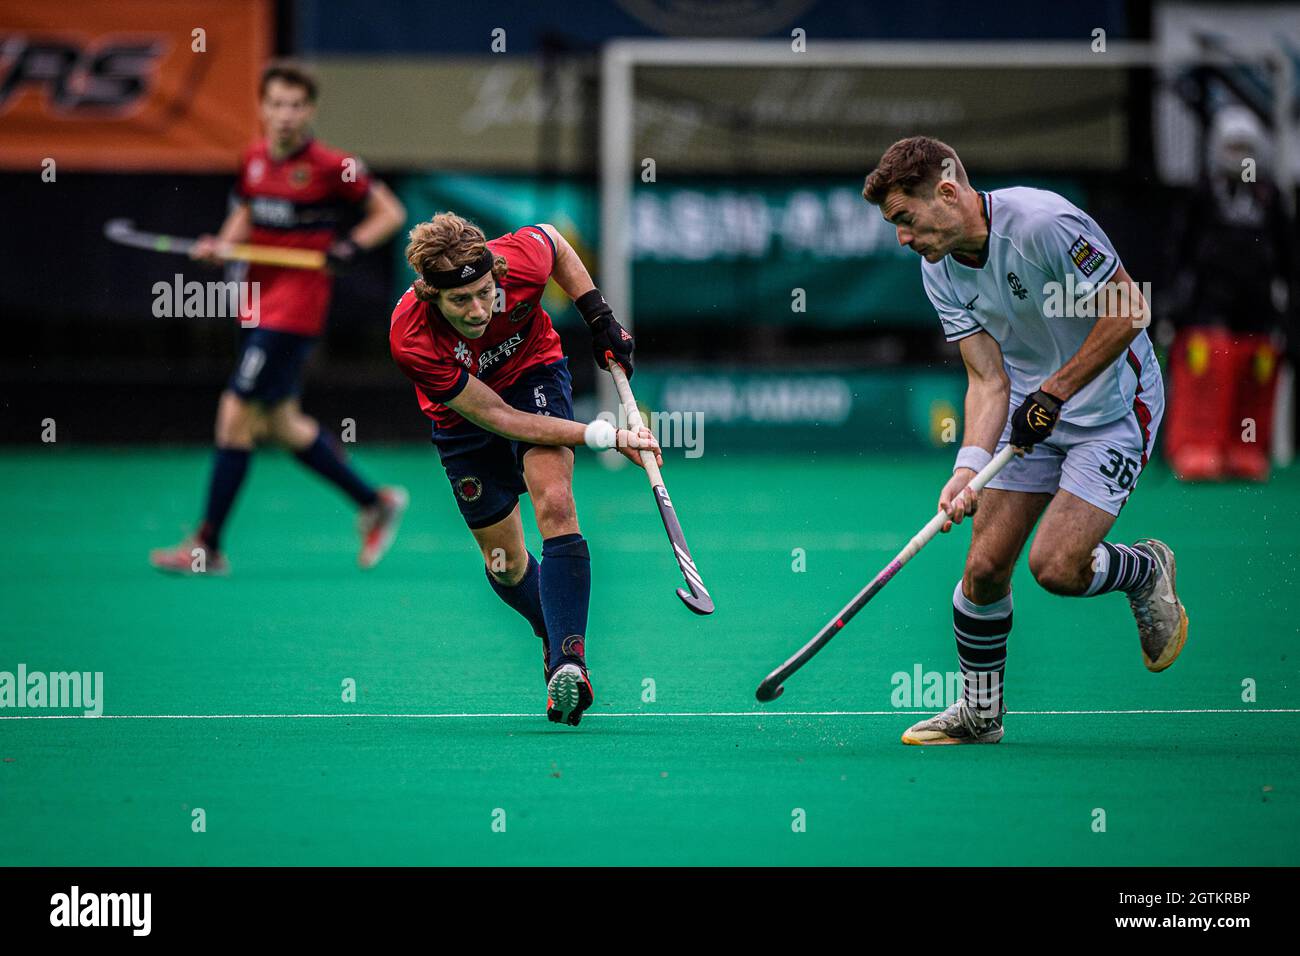 Dragons max lootens and surbitons jack middleton fight for the ball during a hockey game between belgian khc dragons and uk surbiton hc saturday stock photo